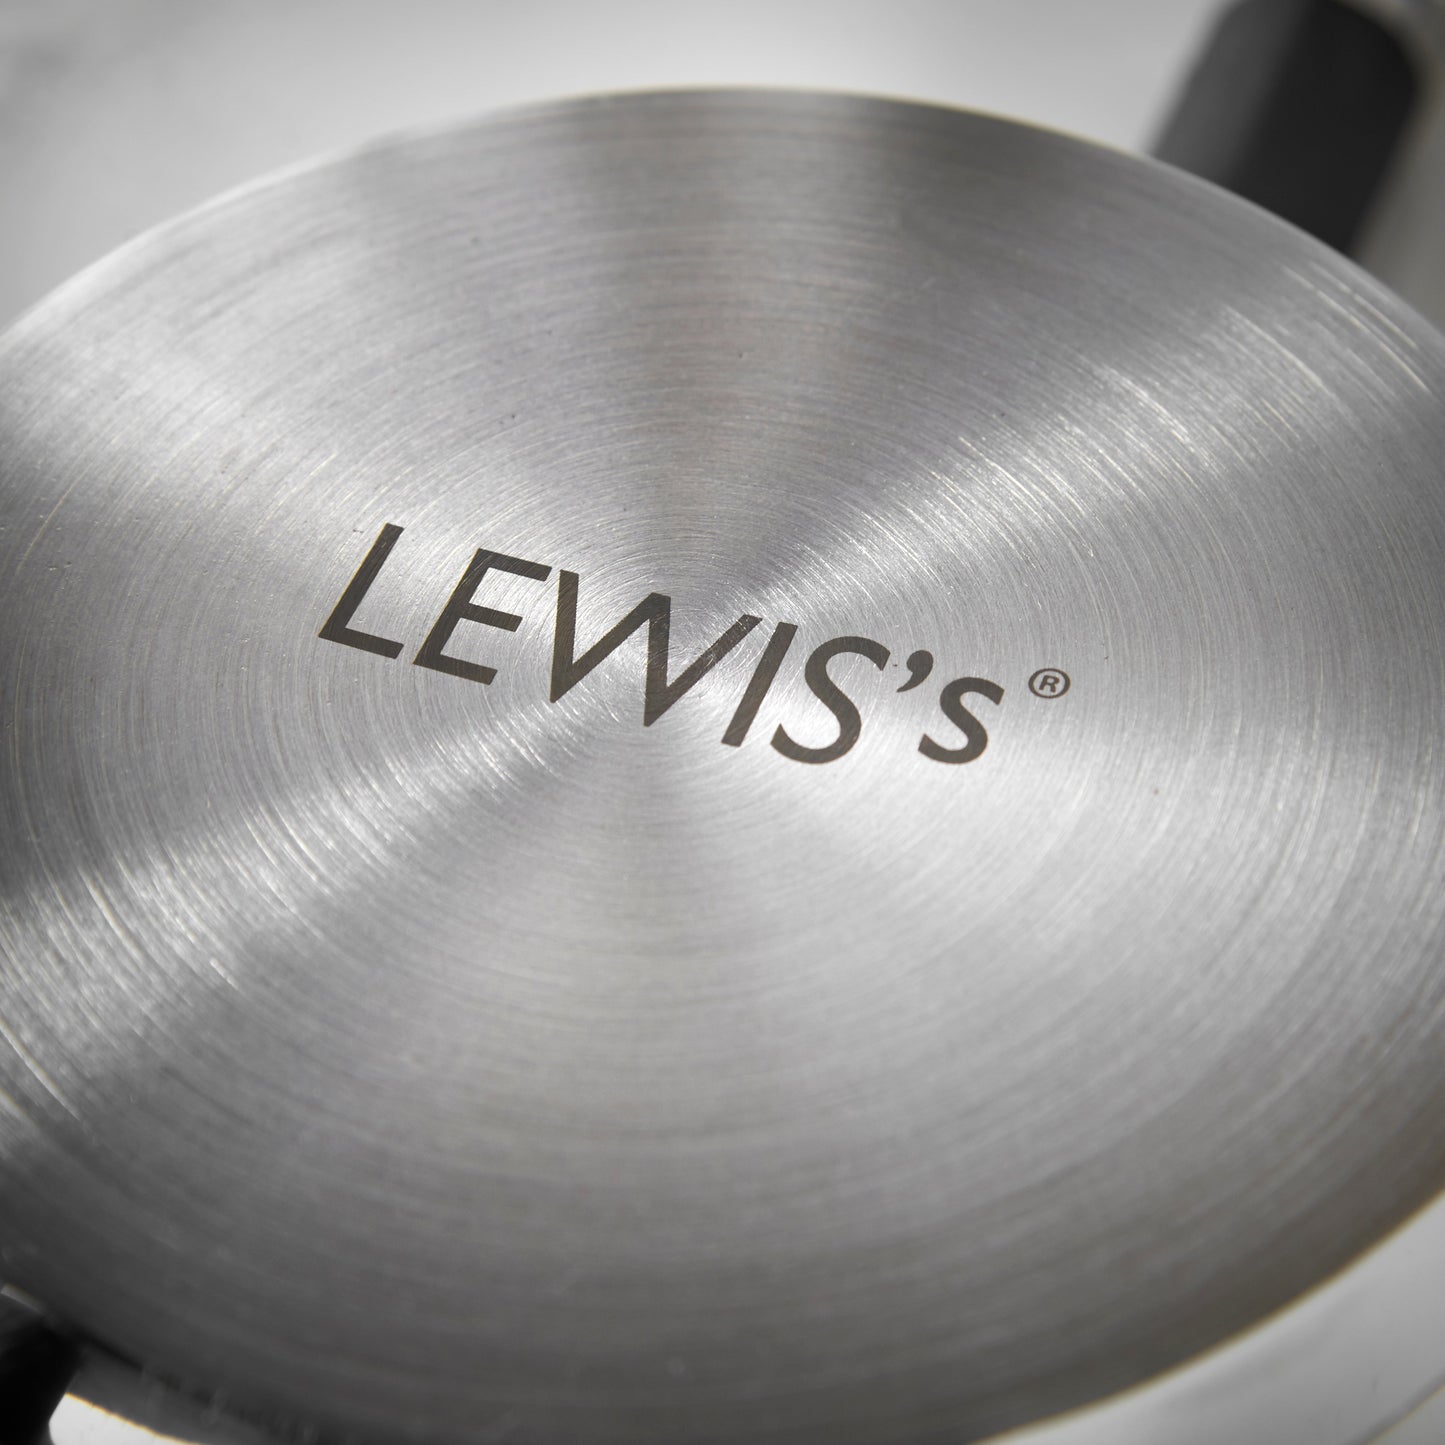 Lewis's 5 Piece Stainless Steel Pan Set with Bakelite Handle & Knob Home Kitchen